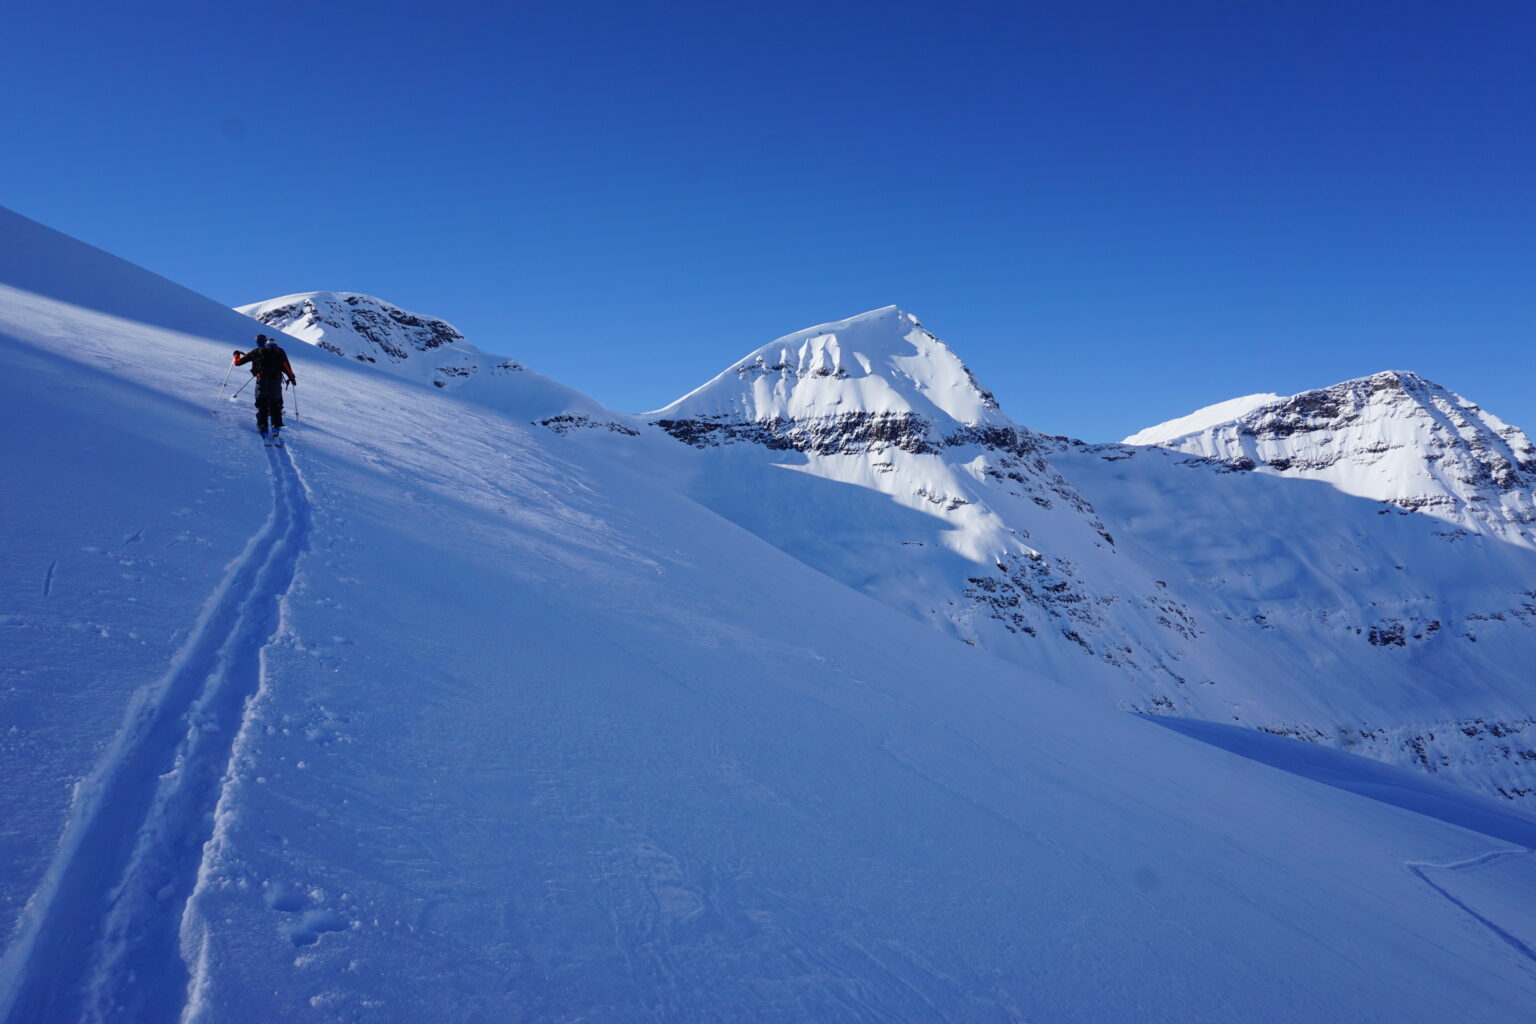 Ski touring to the summit of Sjufjellet in the Northeast bowl